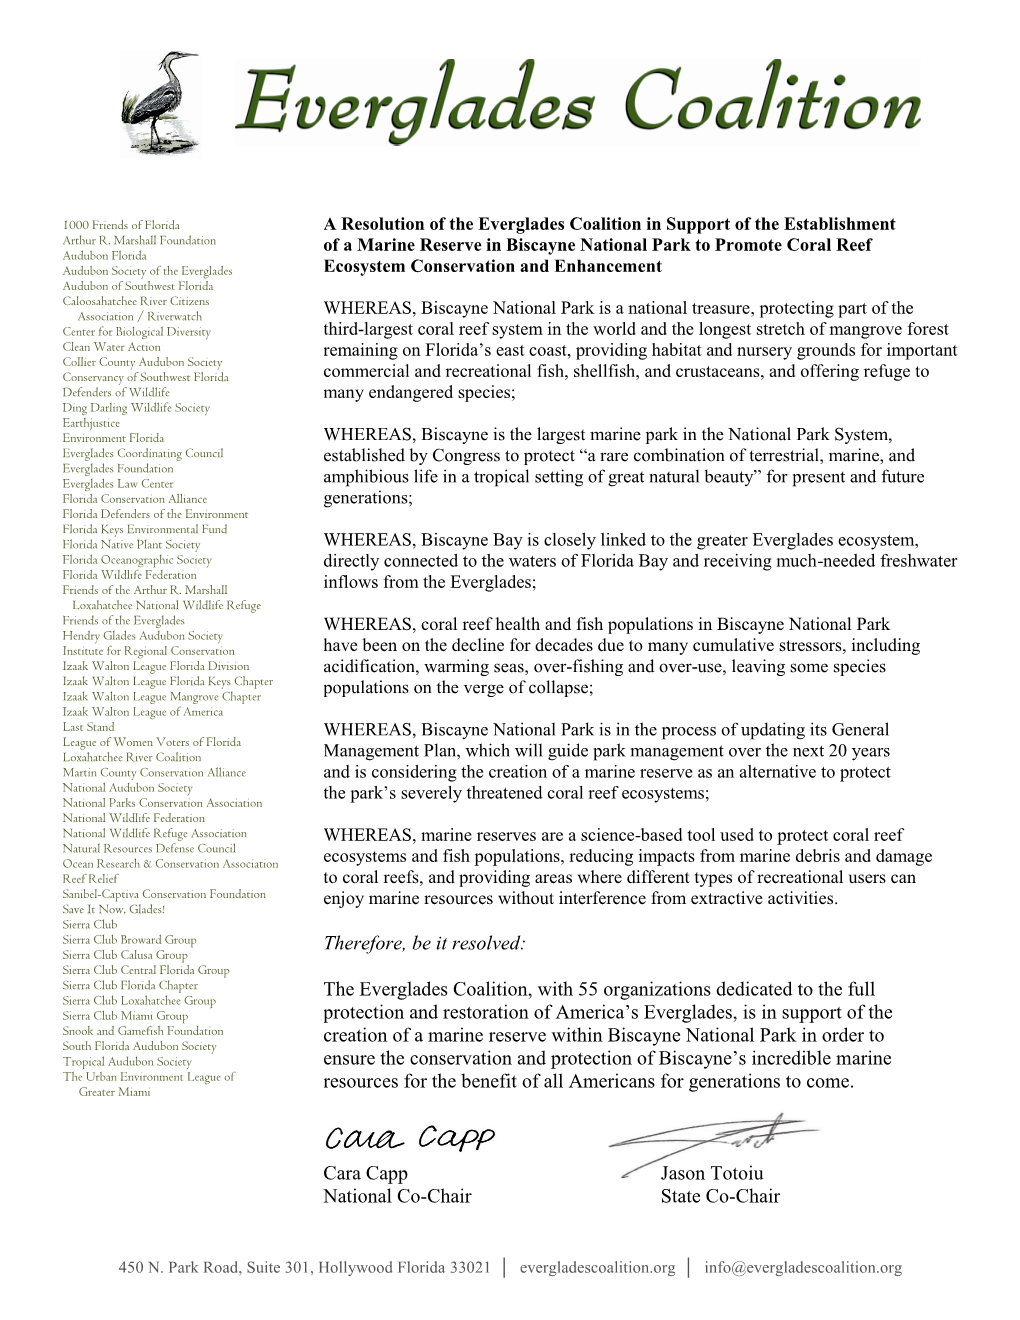 The Everglades Coalition, with 55 Organizations Dedicated To